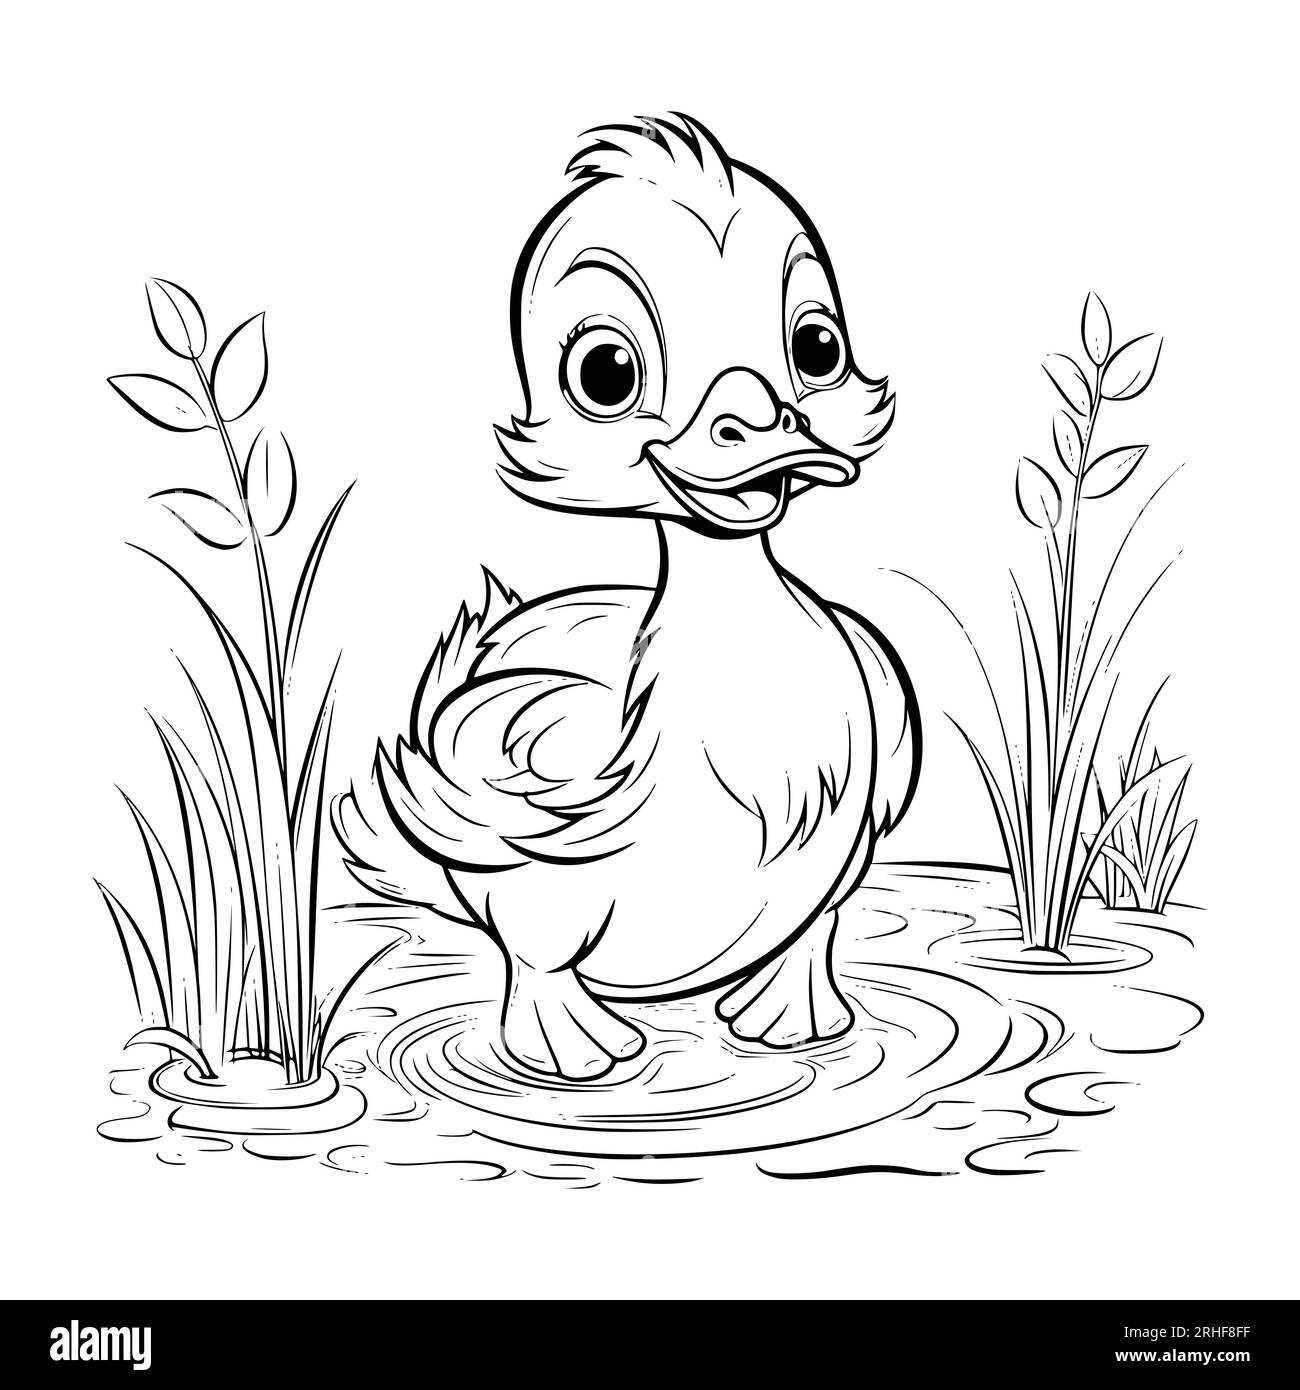 How To Draw Baby Daisy Duck, Step by Step, Drawing Guide, by Dawn - DragoArt